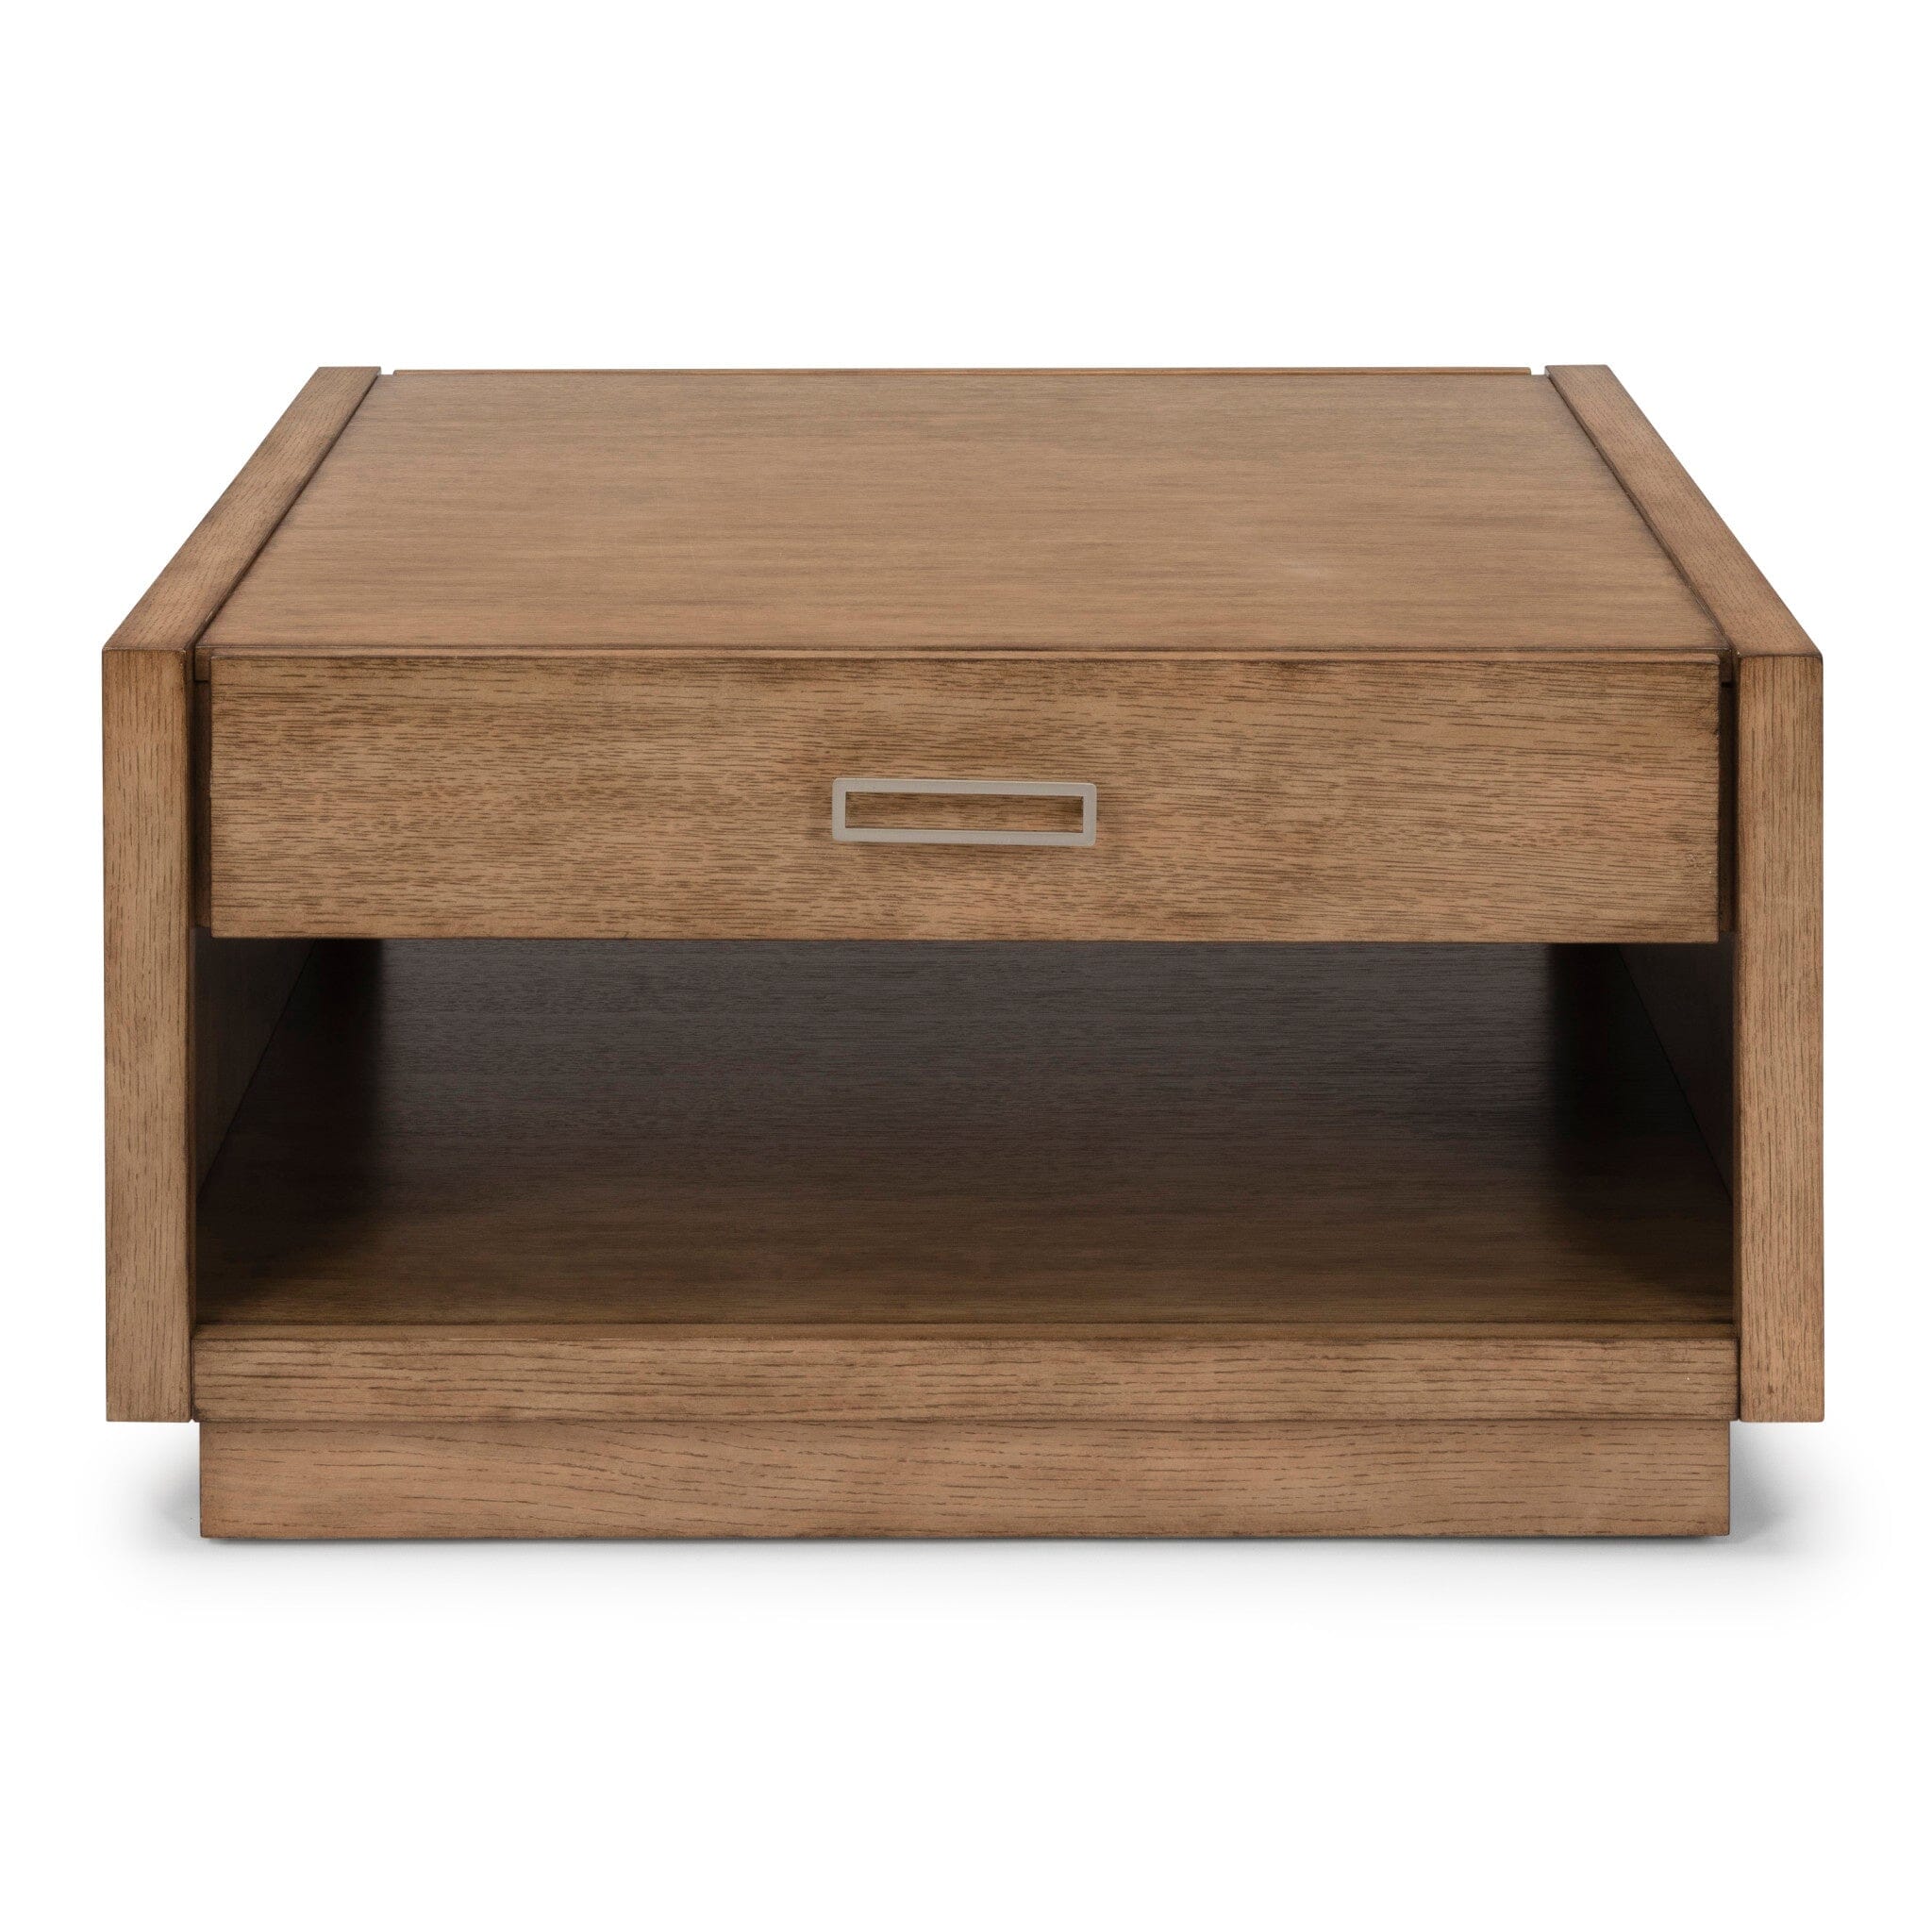 Modern & Contemporary Coffee Table By Big Sur Coffee Table Big Sur